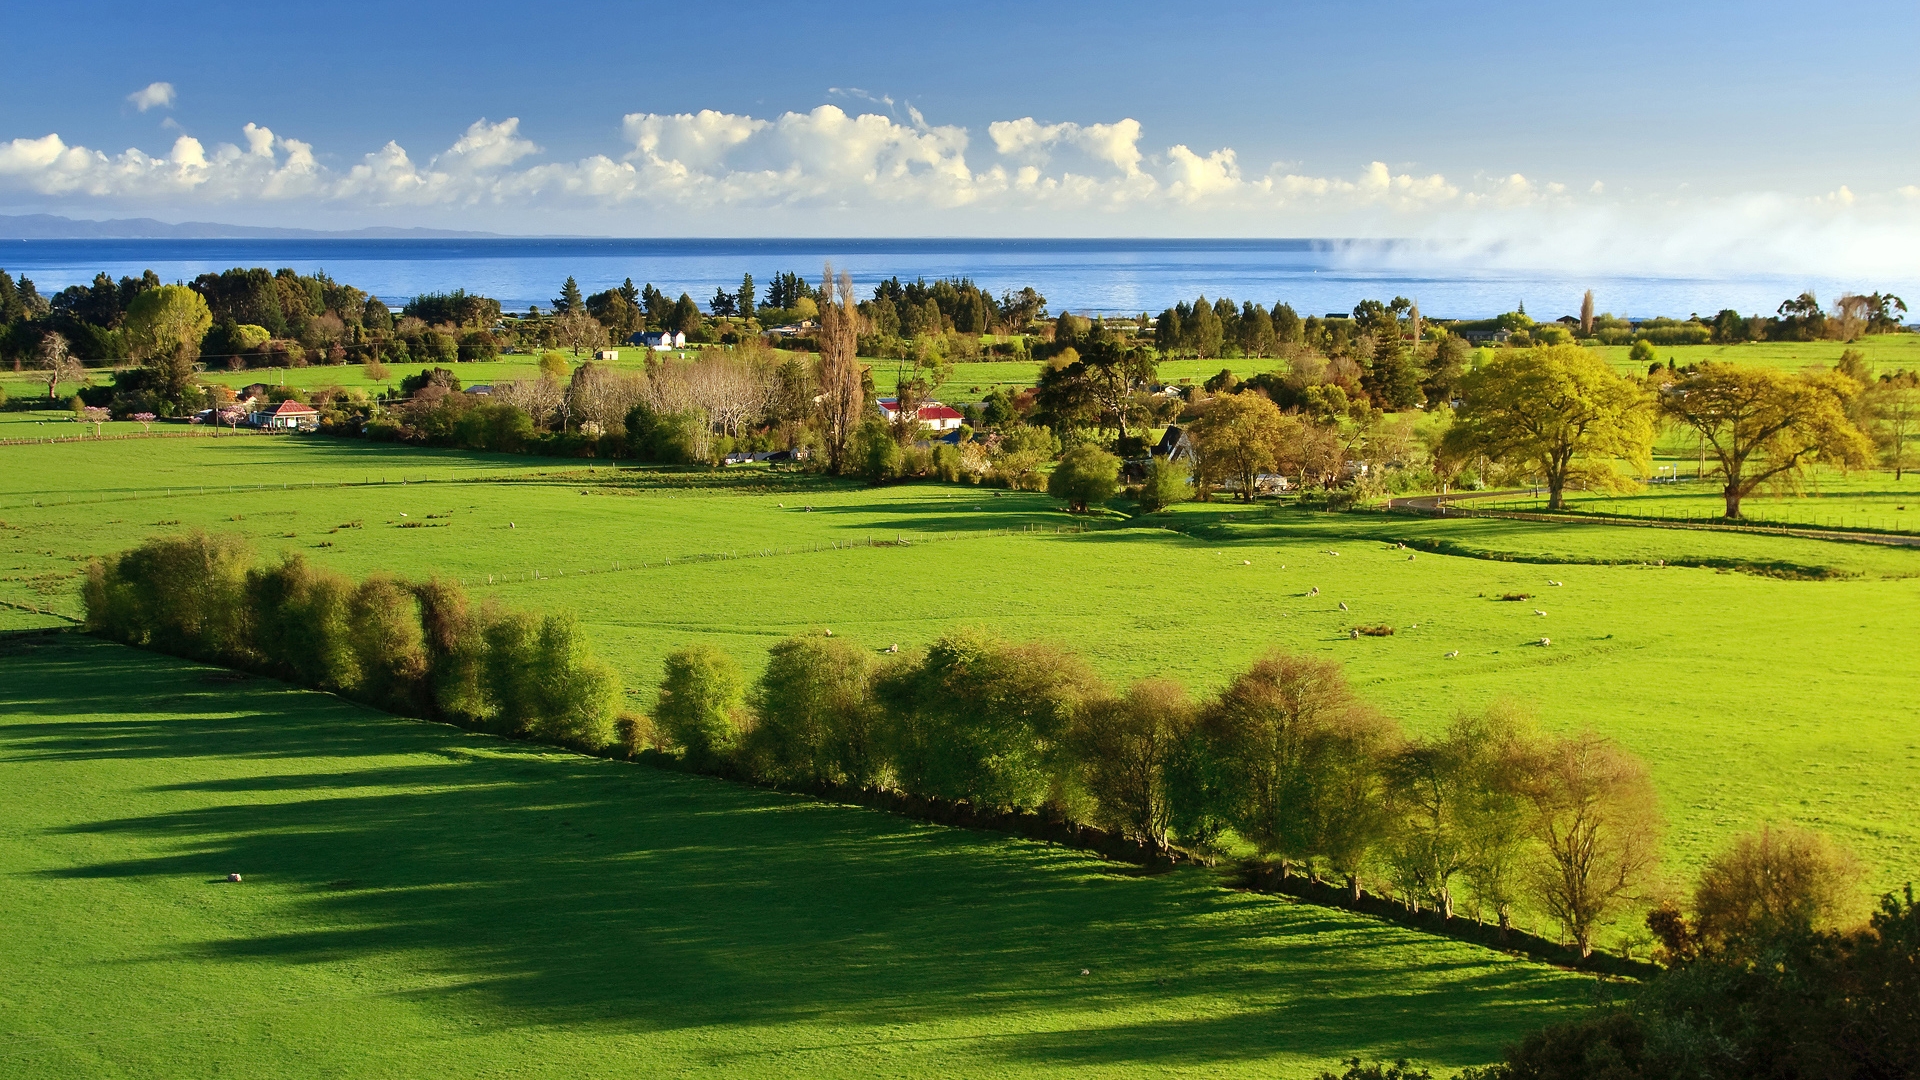 Amazing Green Landscape for 1920 x 1080 HDTV 1080p resolution